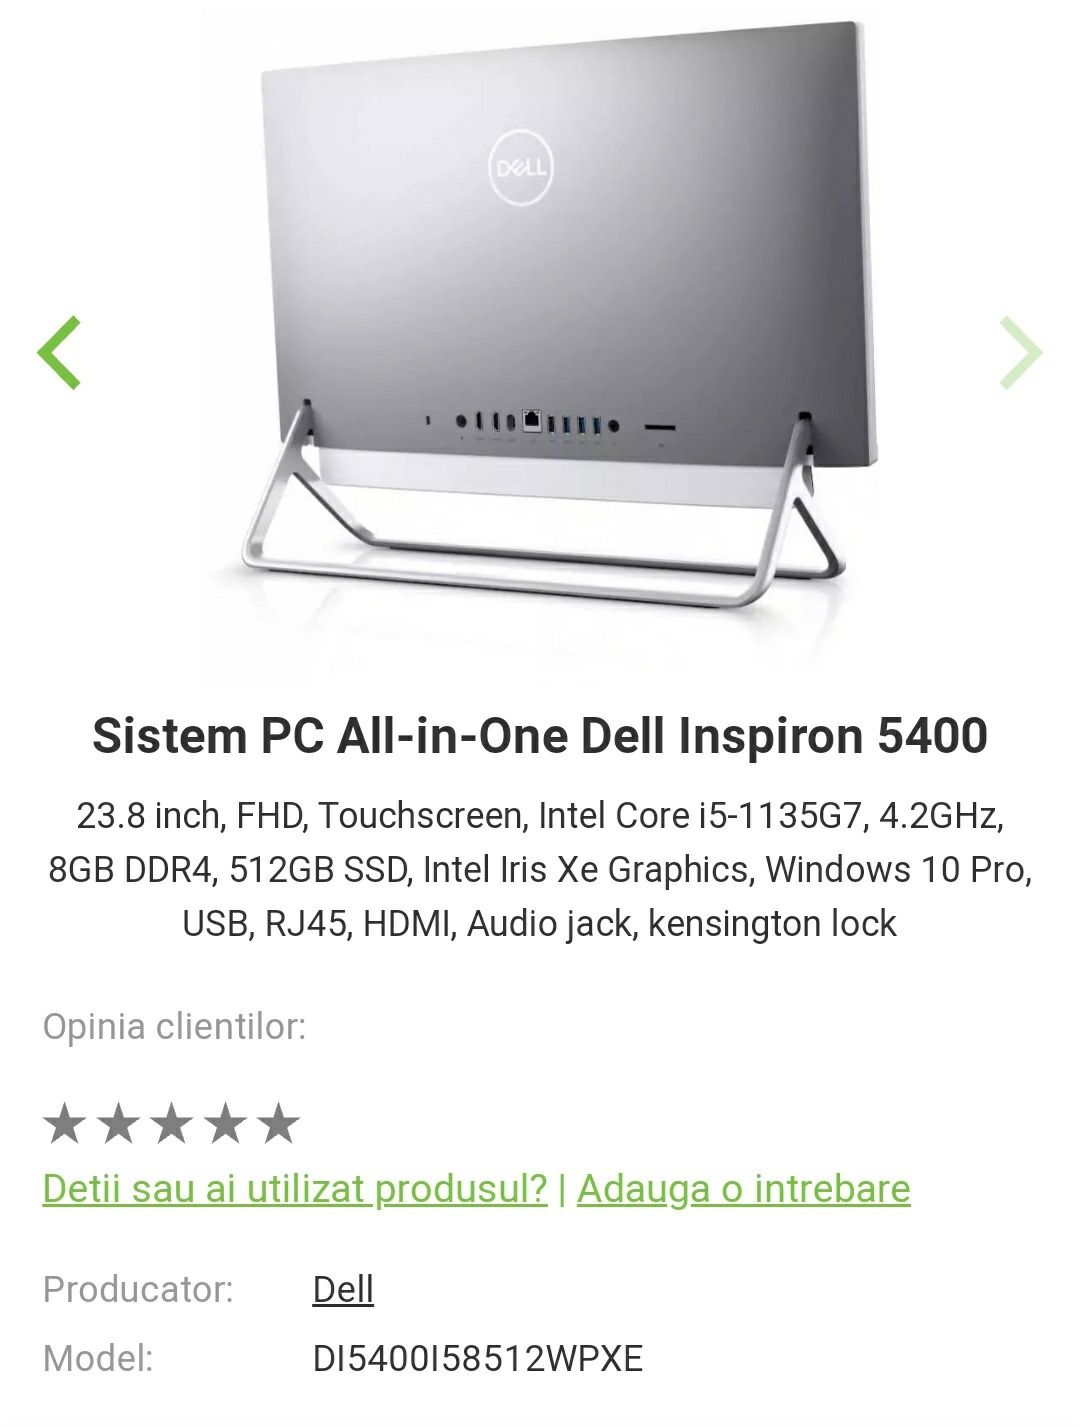 Sistem PC all-in-one Dell Inspiron 5400